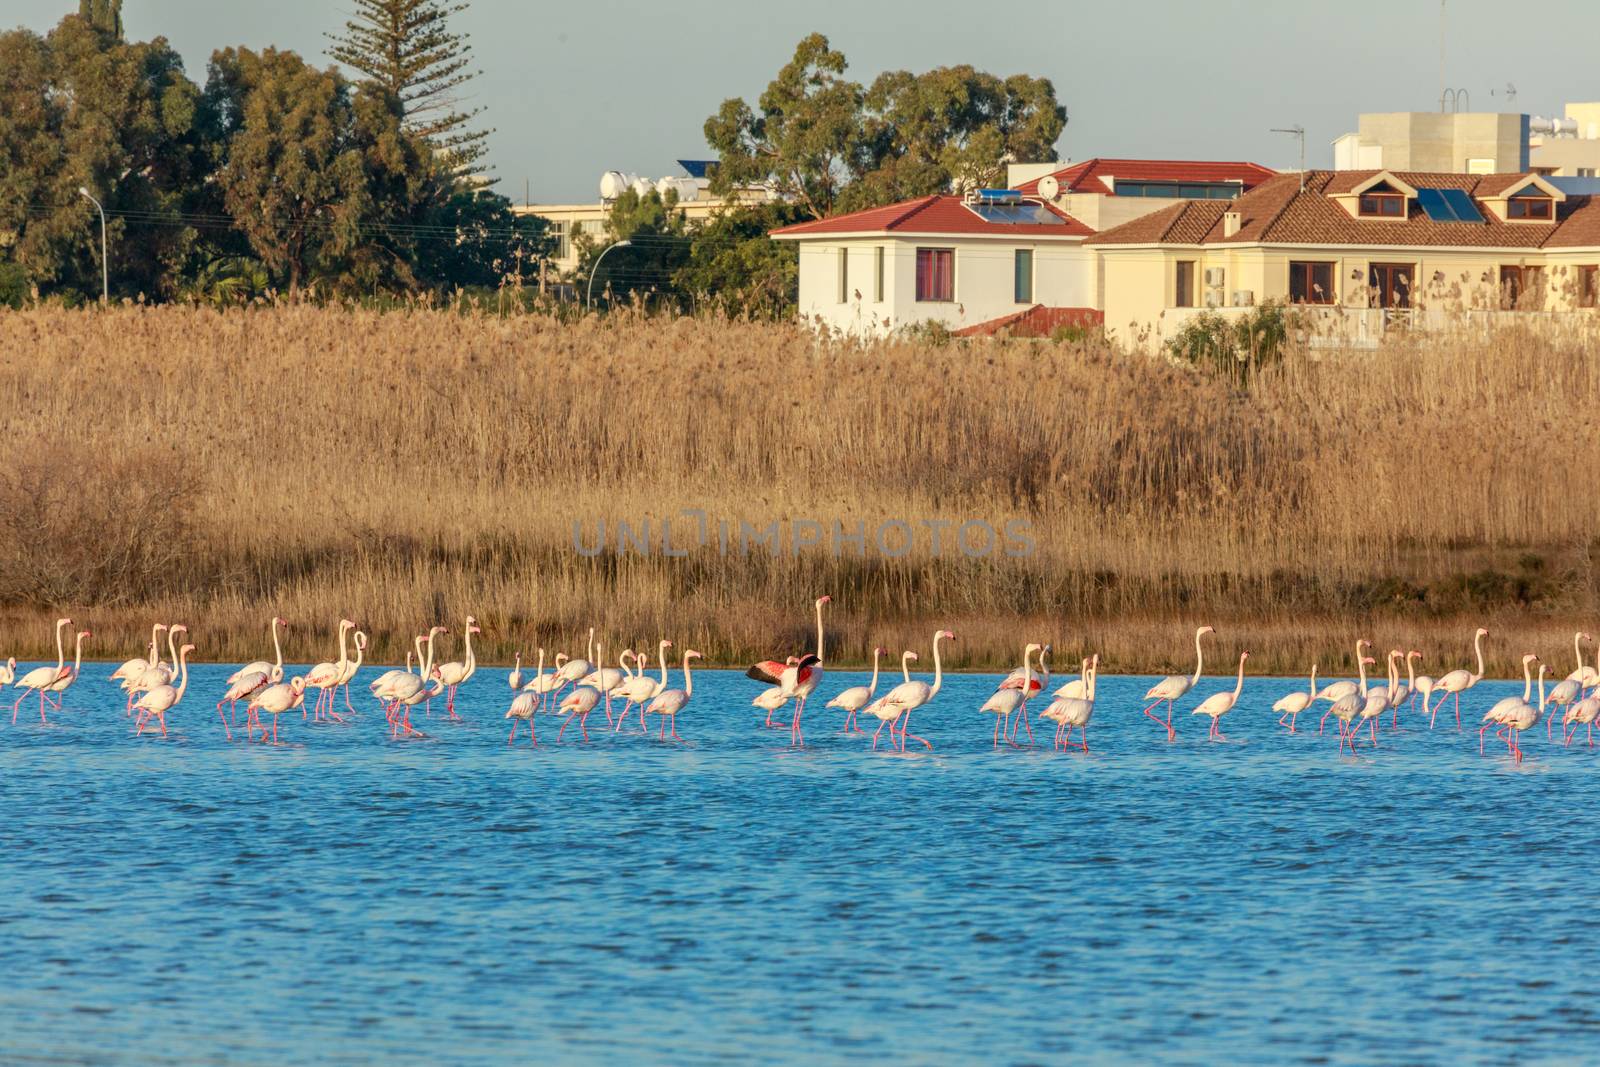 Lots of pink flamingos marching across the lake with residential buildings in the background, Larnaca salt lake, Cyprus